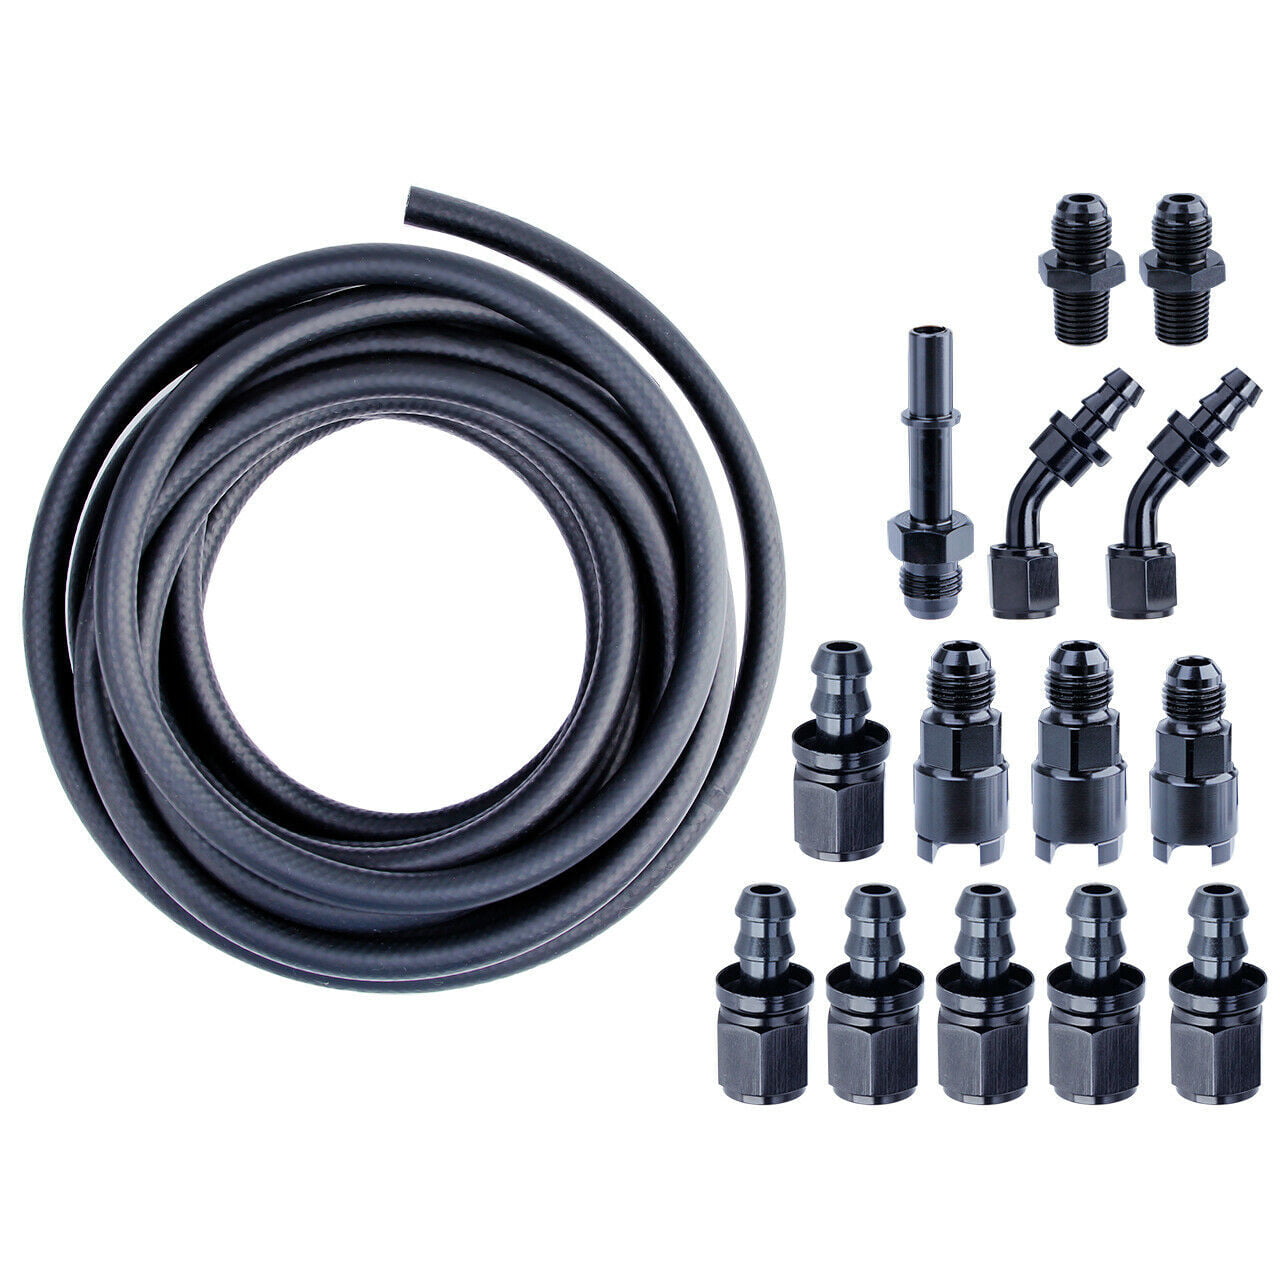 CPP Complete LS Conversion Fuel Injection Line Install Kit EFI FI